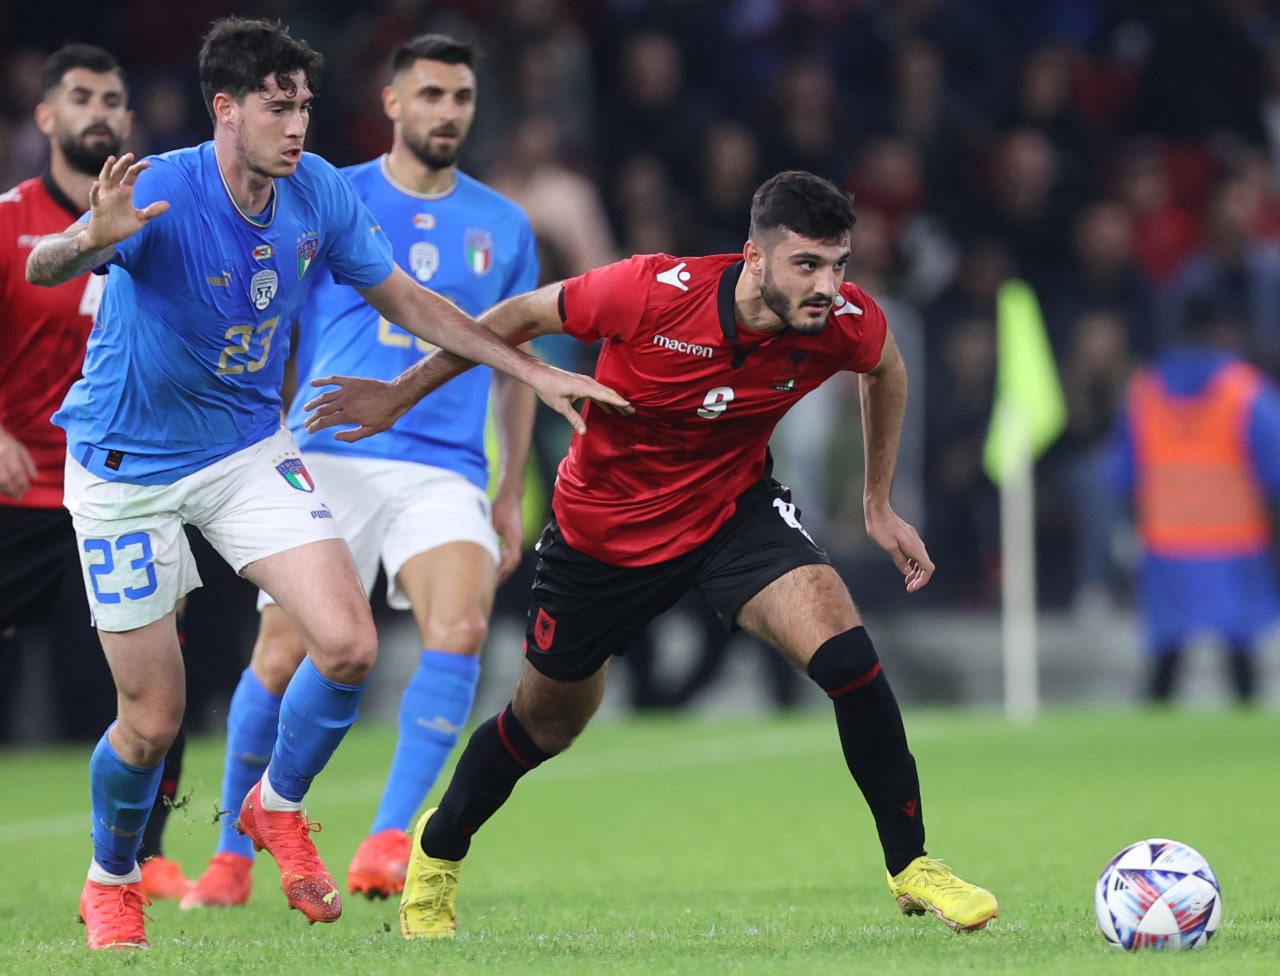 Alessandro Bastoni (L) fights for the ball with Albania’s forward Armando Broja (R) during a friendly football match between Albania and Italy, at the Air Albania Stadium in Tirana on November 16, 2022. (Photo by Gent SHKULLAKU / AFP) (Photo by GENT SHKULLAKU/AFP via Getty Images)